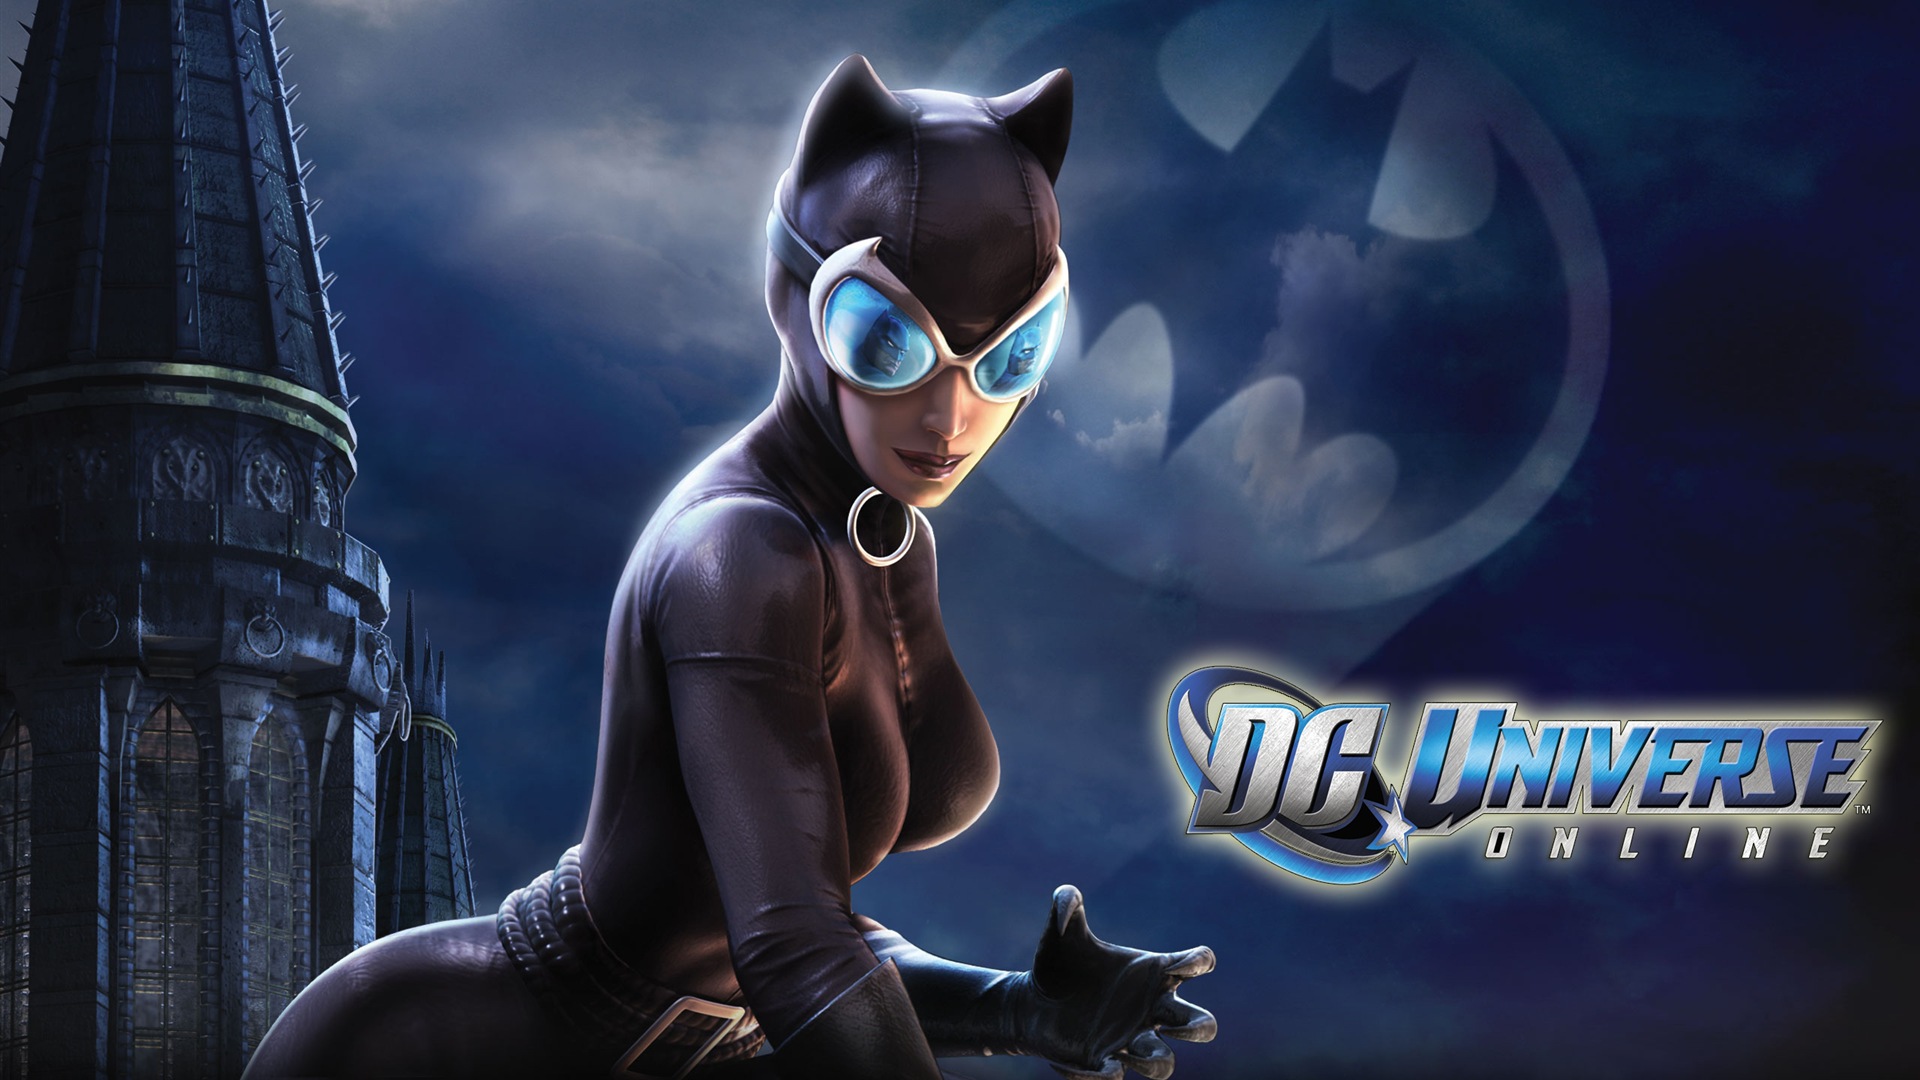 DC Universe Online HD game wallpapers #25 - 1920x1080